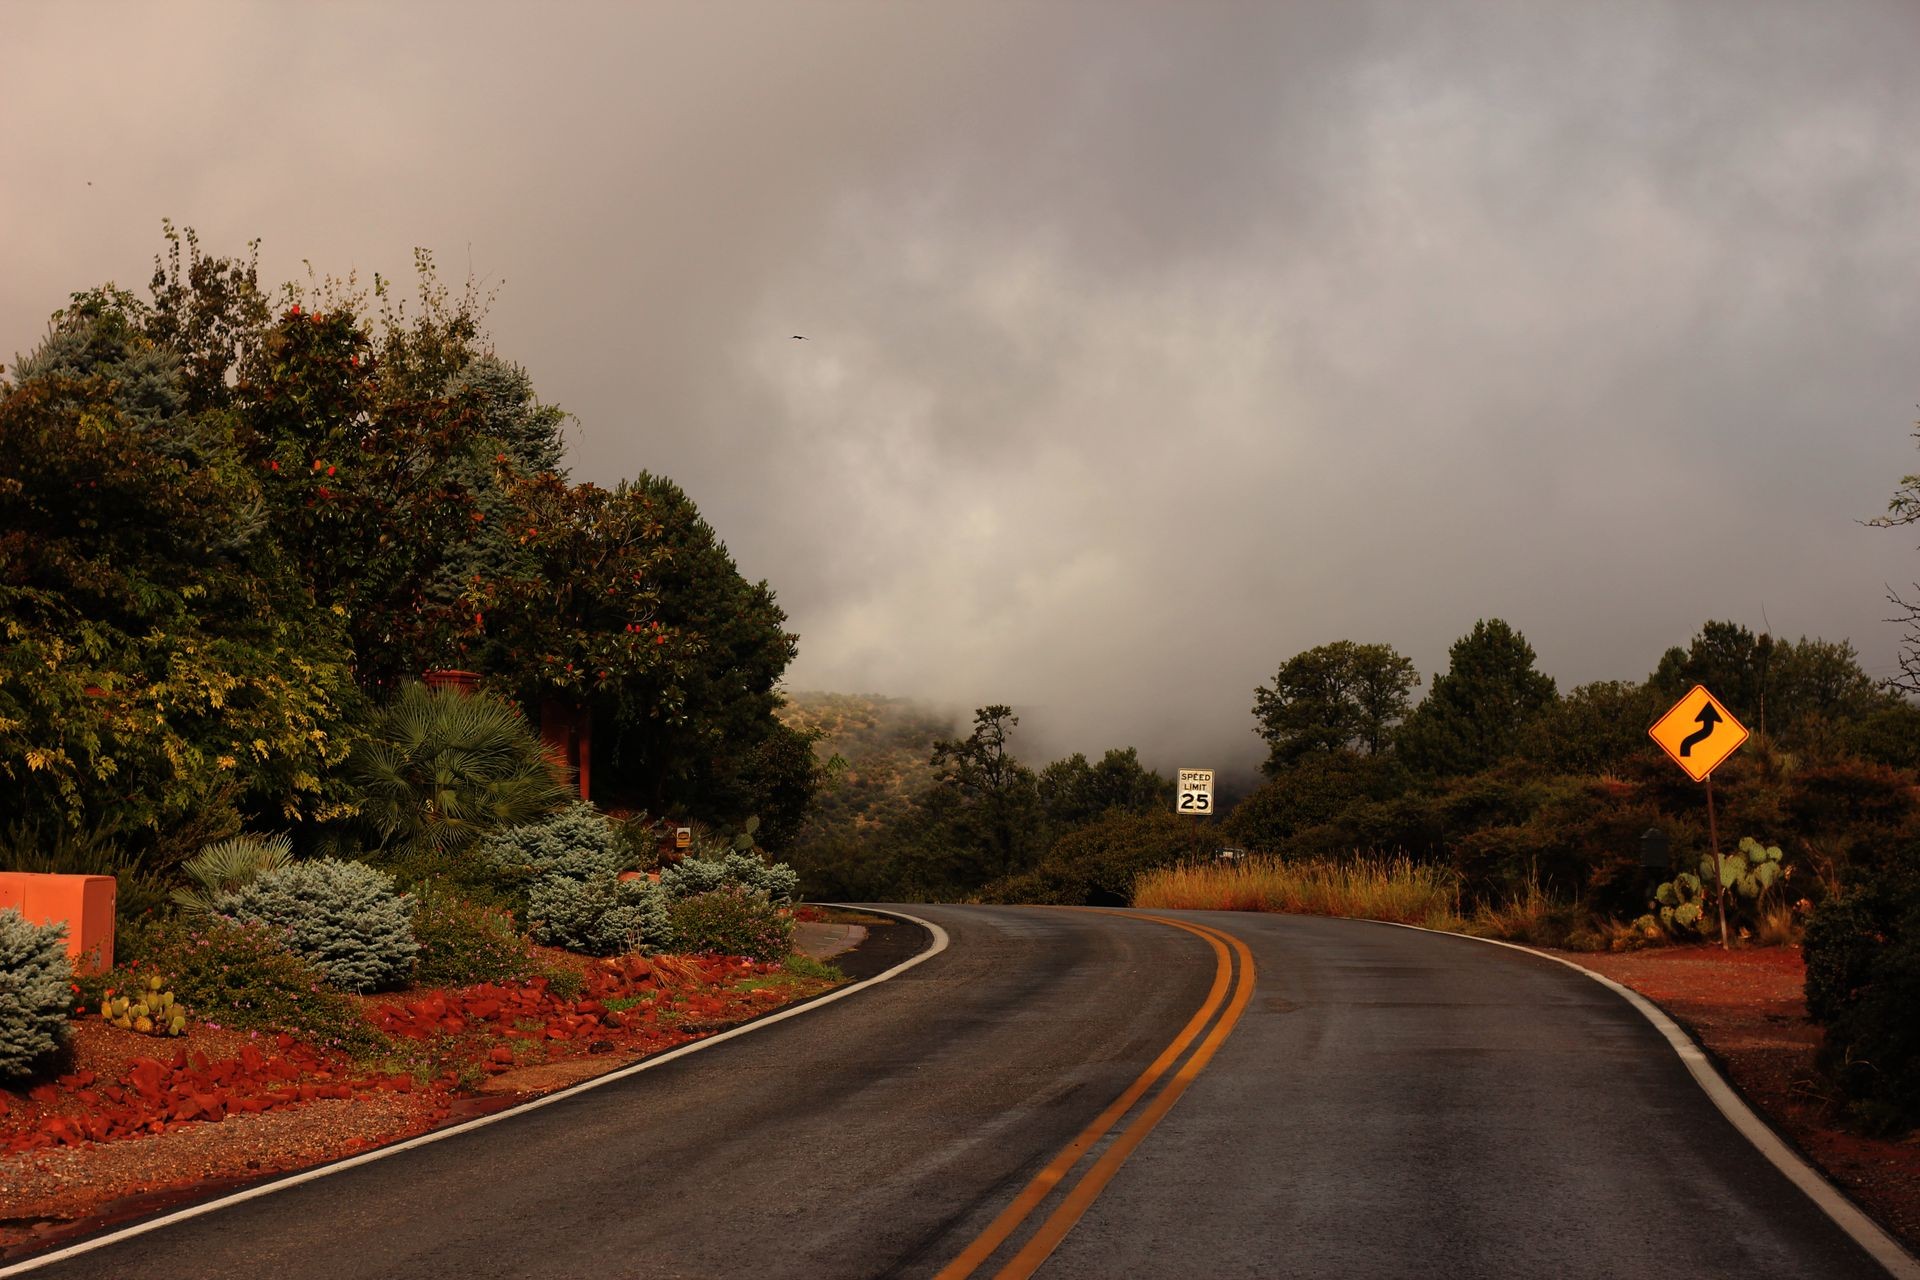 Highway in Sedona Arizona during a cloudy day